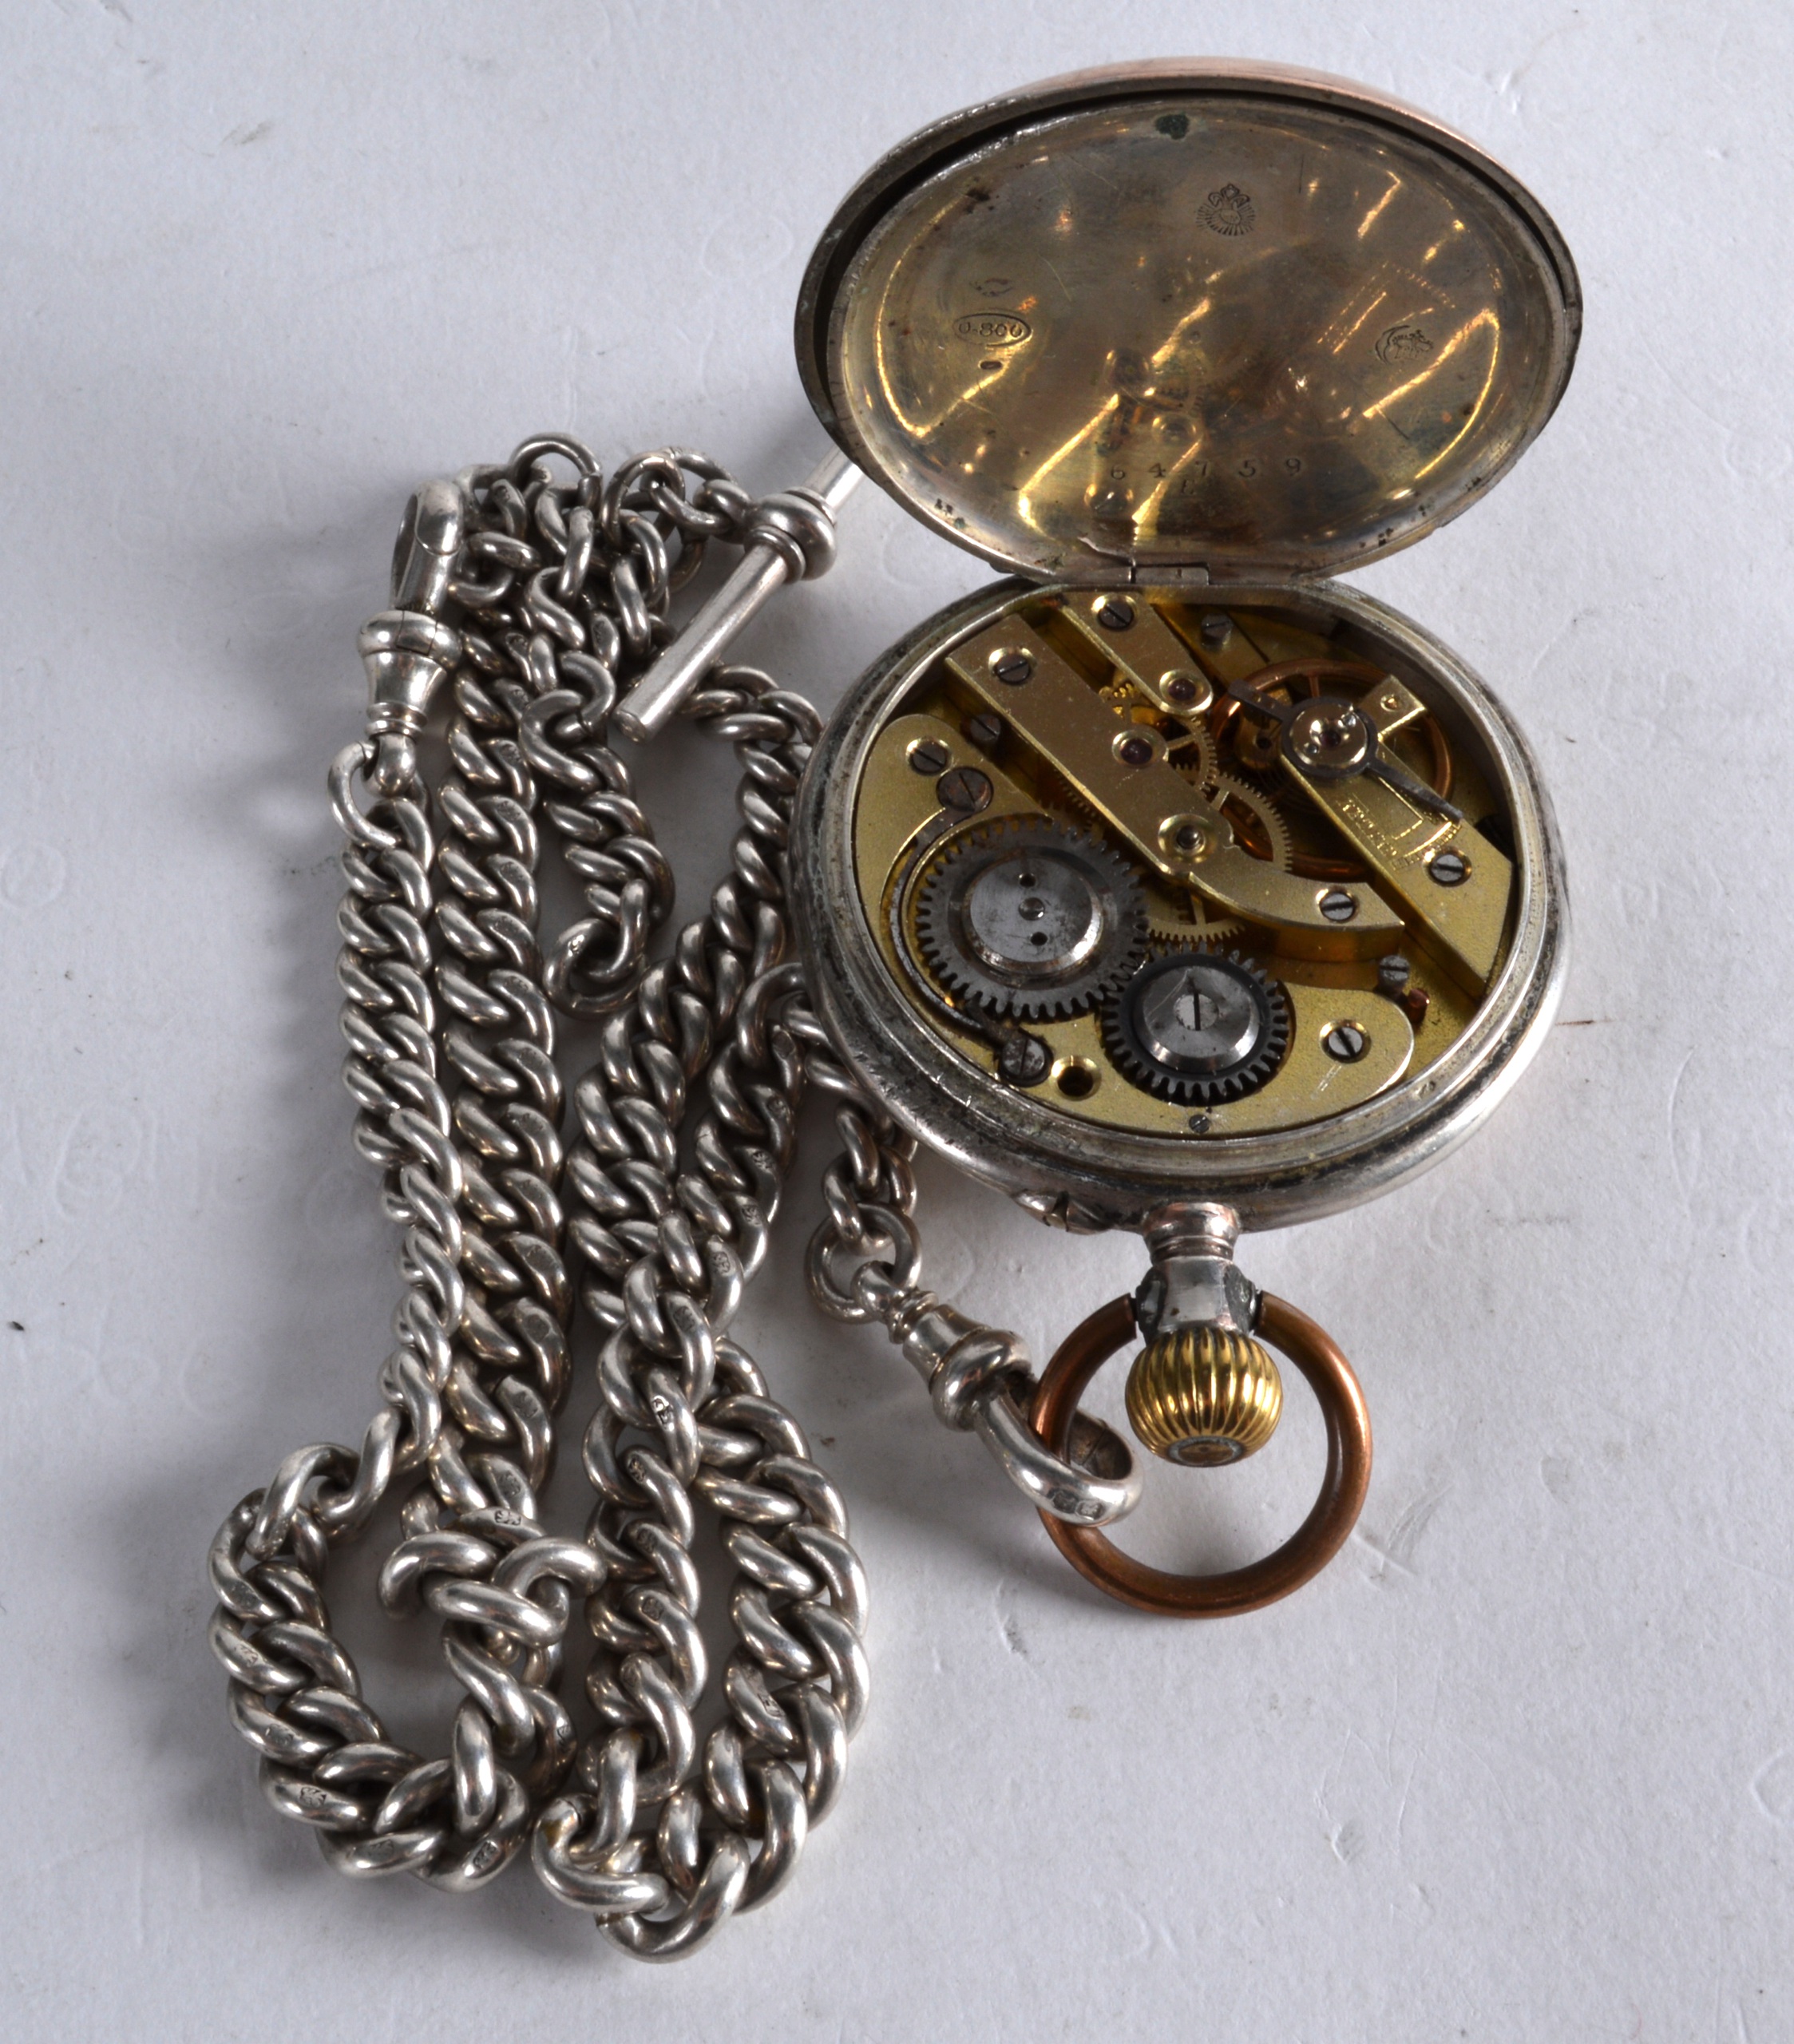 A LATE 19TH CENTURY CONTINENTAL SILVER POCKET WATCH with attached silver chain, the case decorated - Image 2 of 2